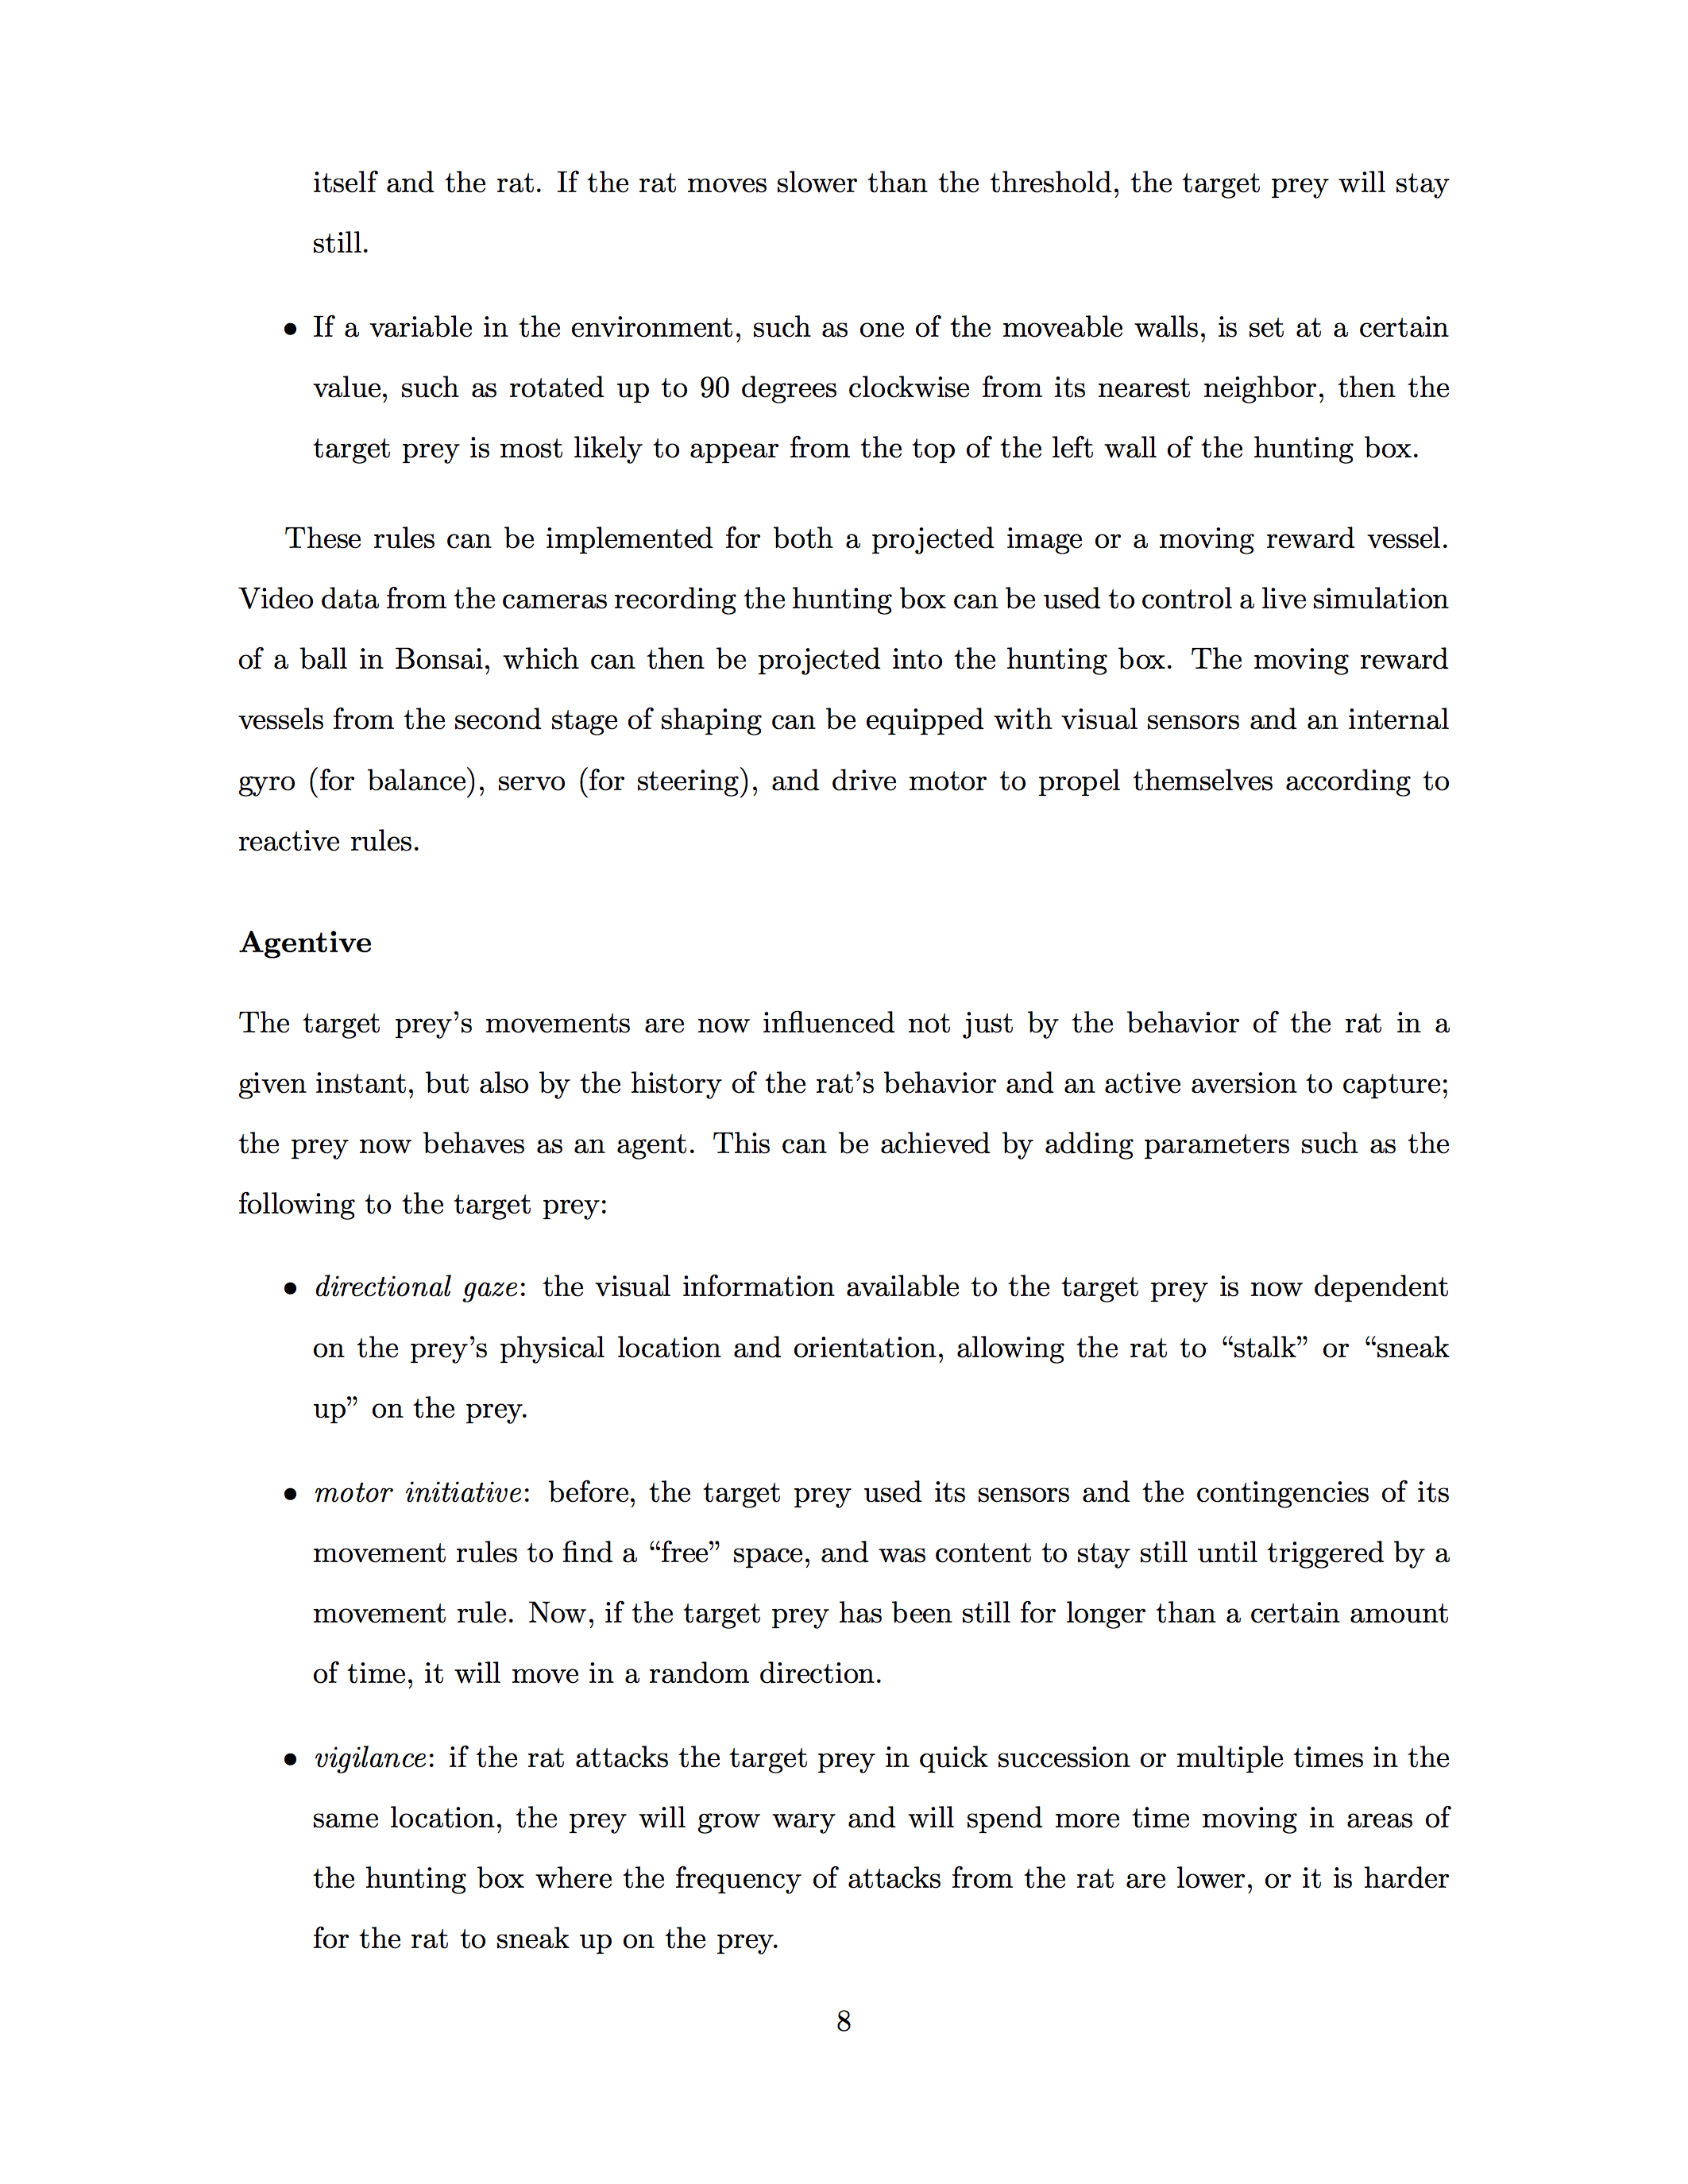 PhD thesis proposal, page 08